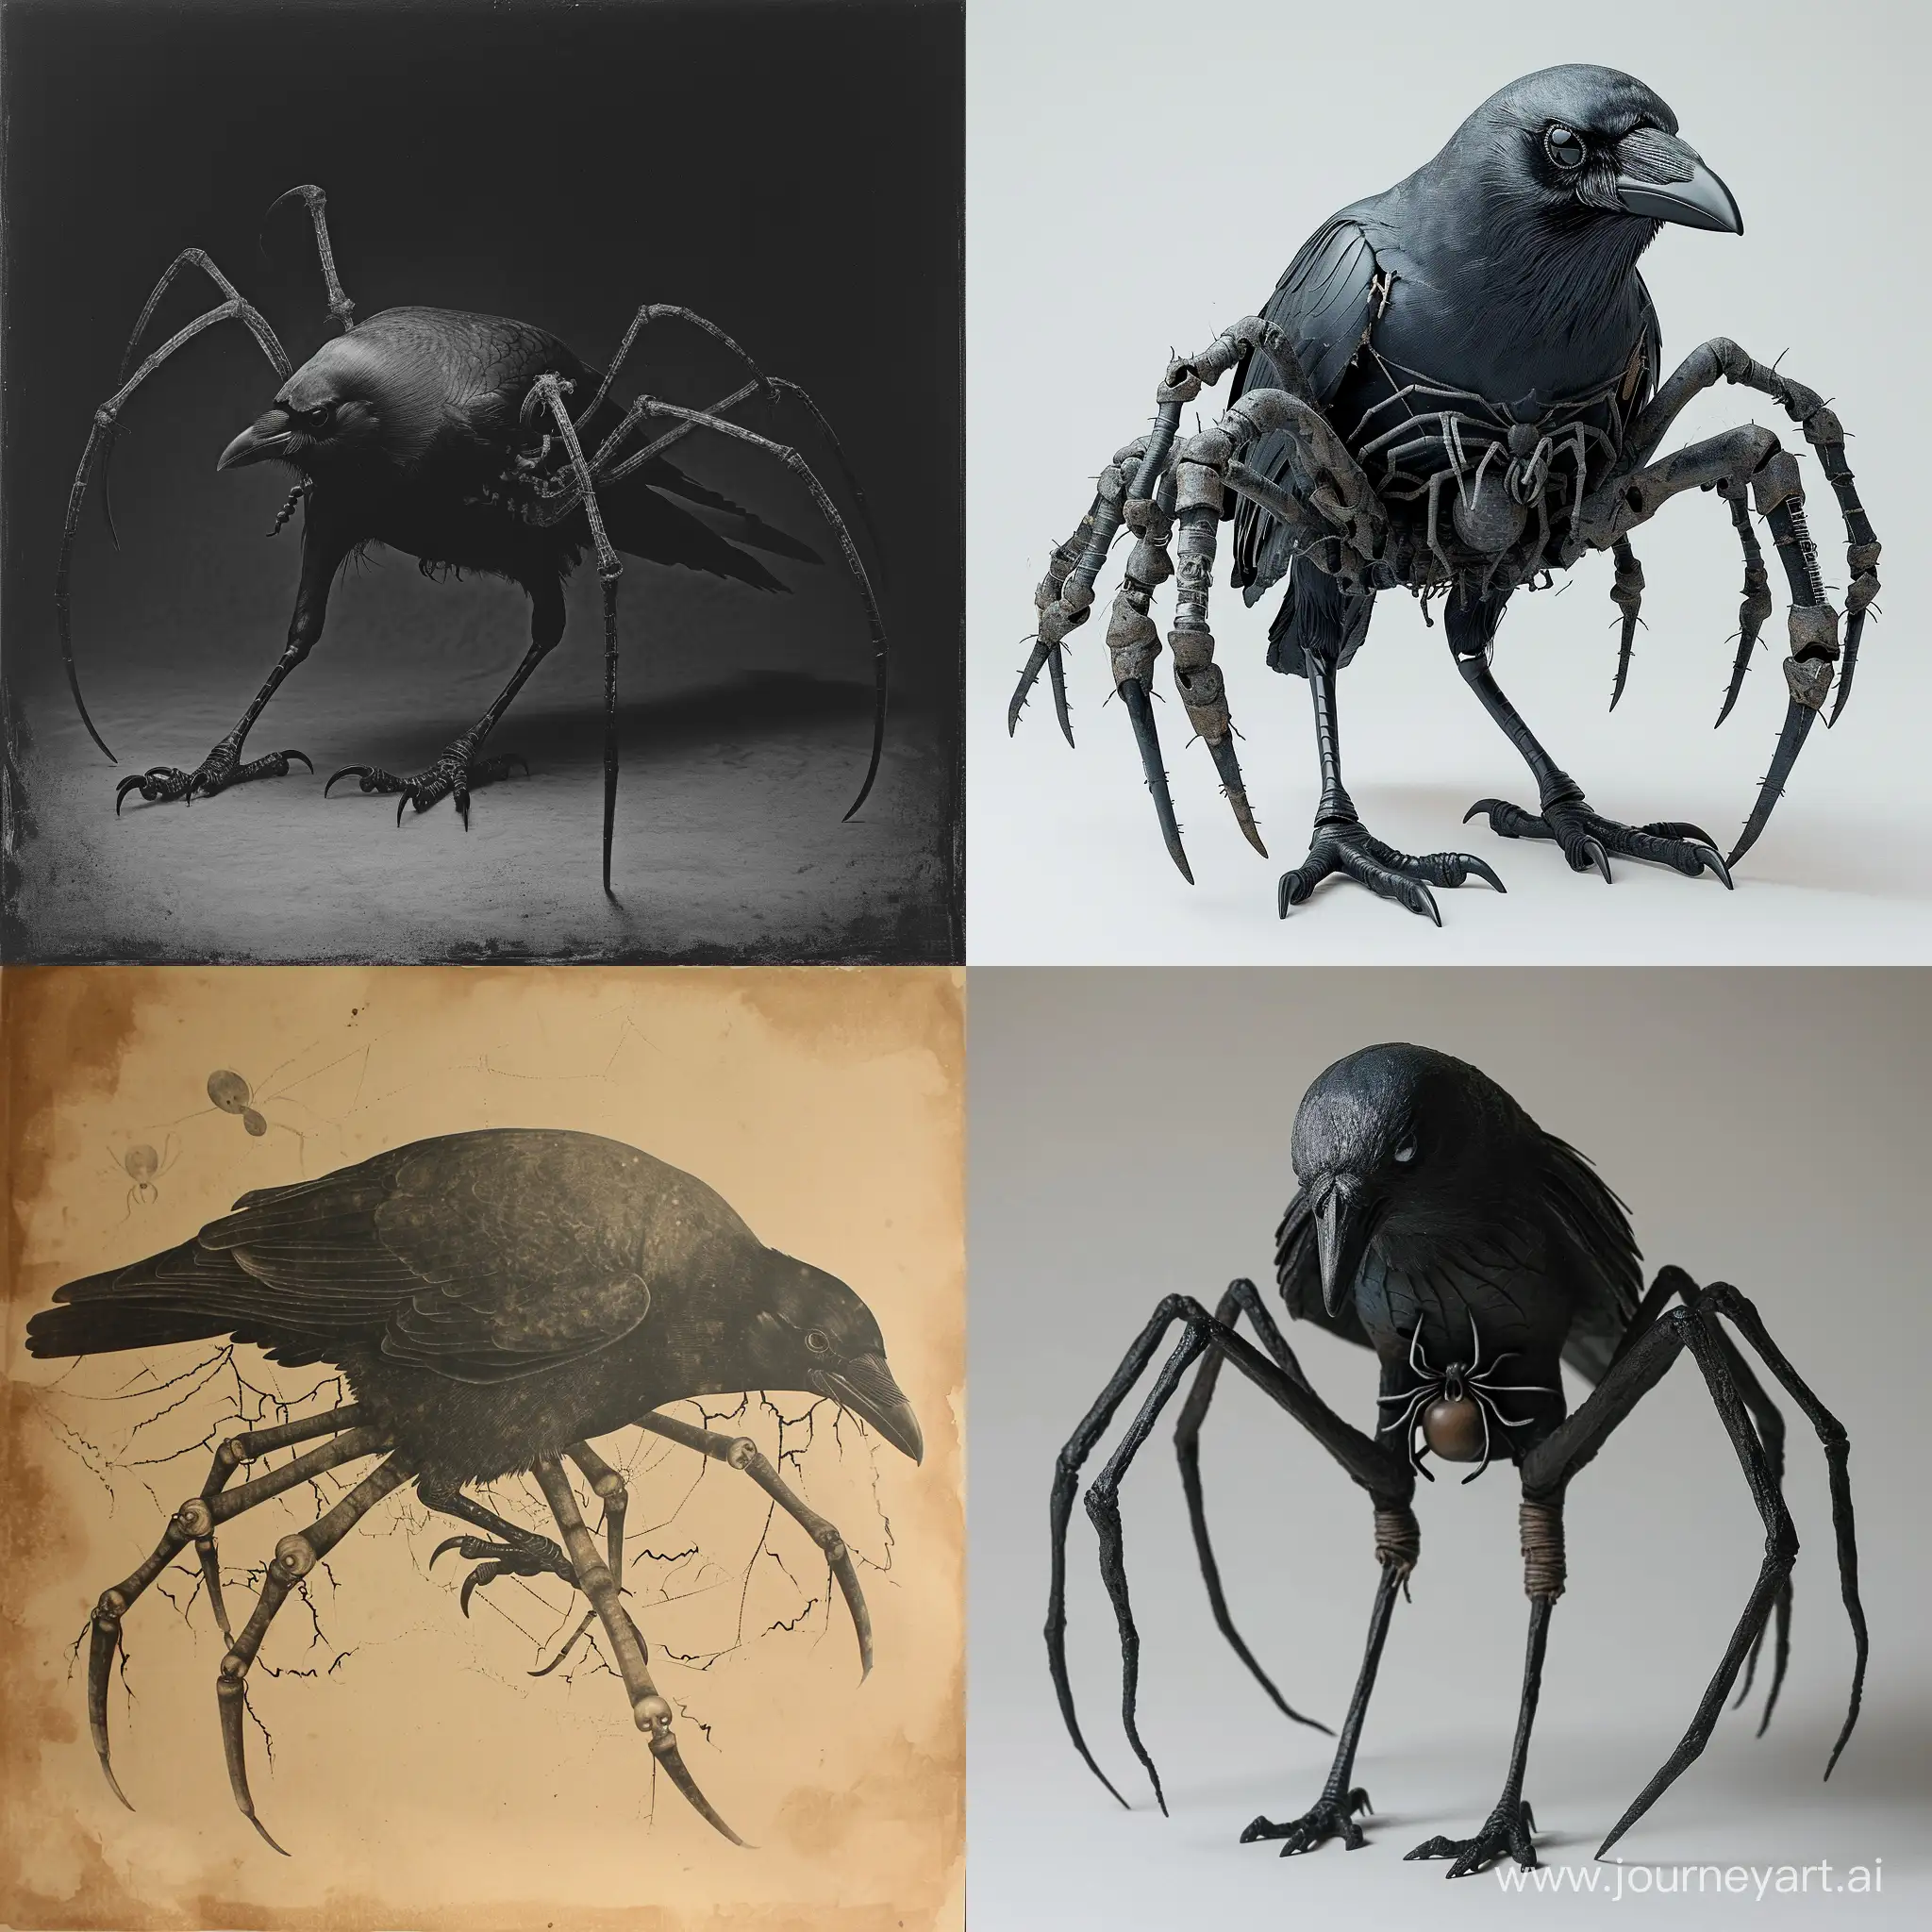 Unusual-Hybrid-Crow-with-Spider-Legs-and-Human-Arms